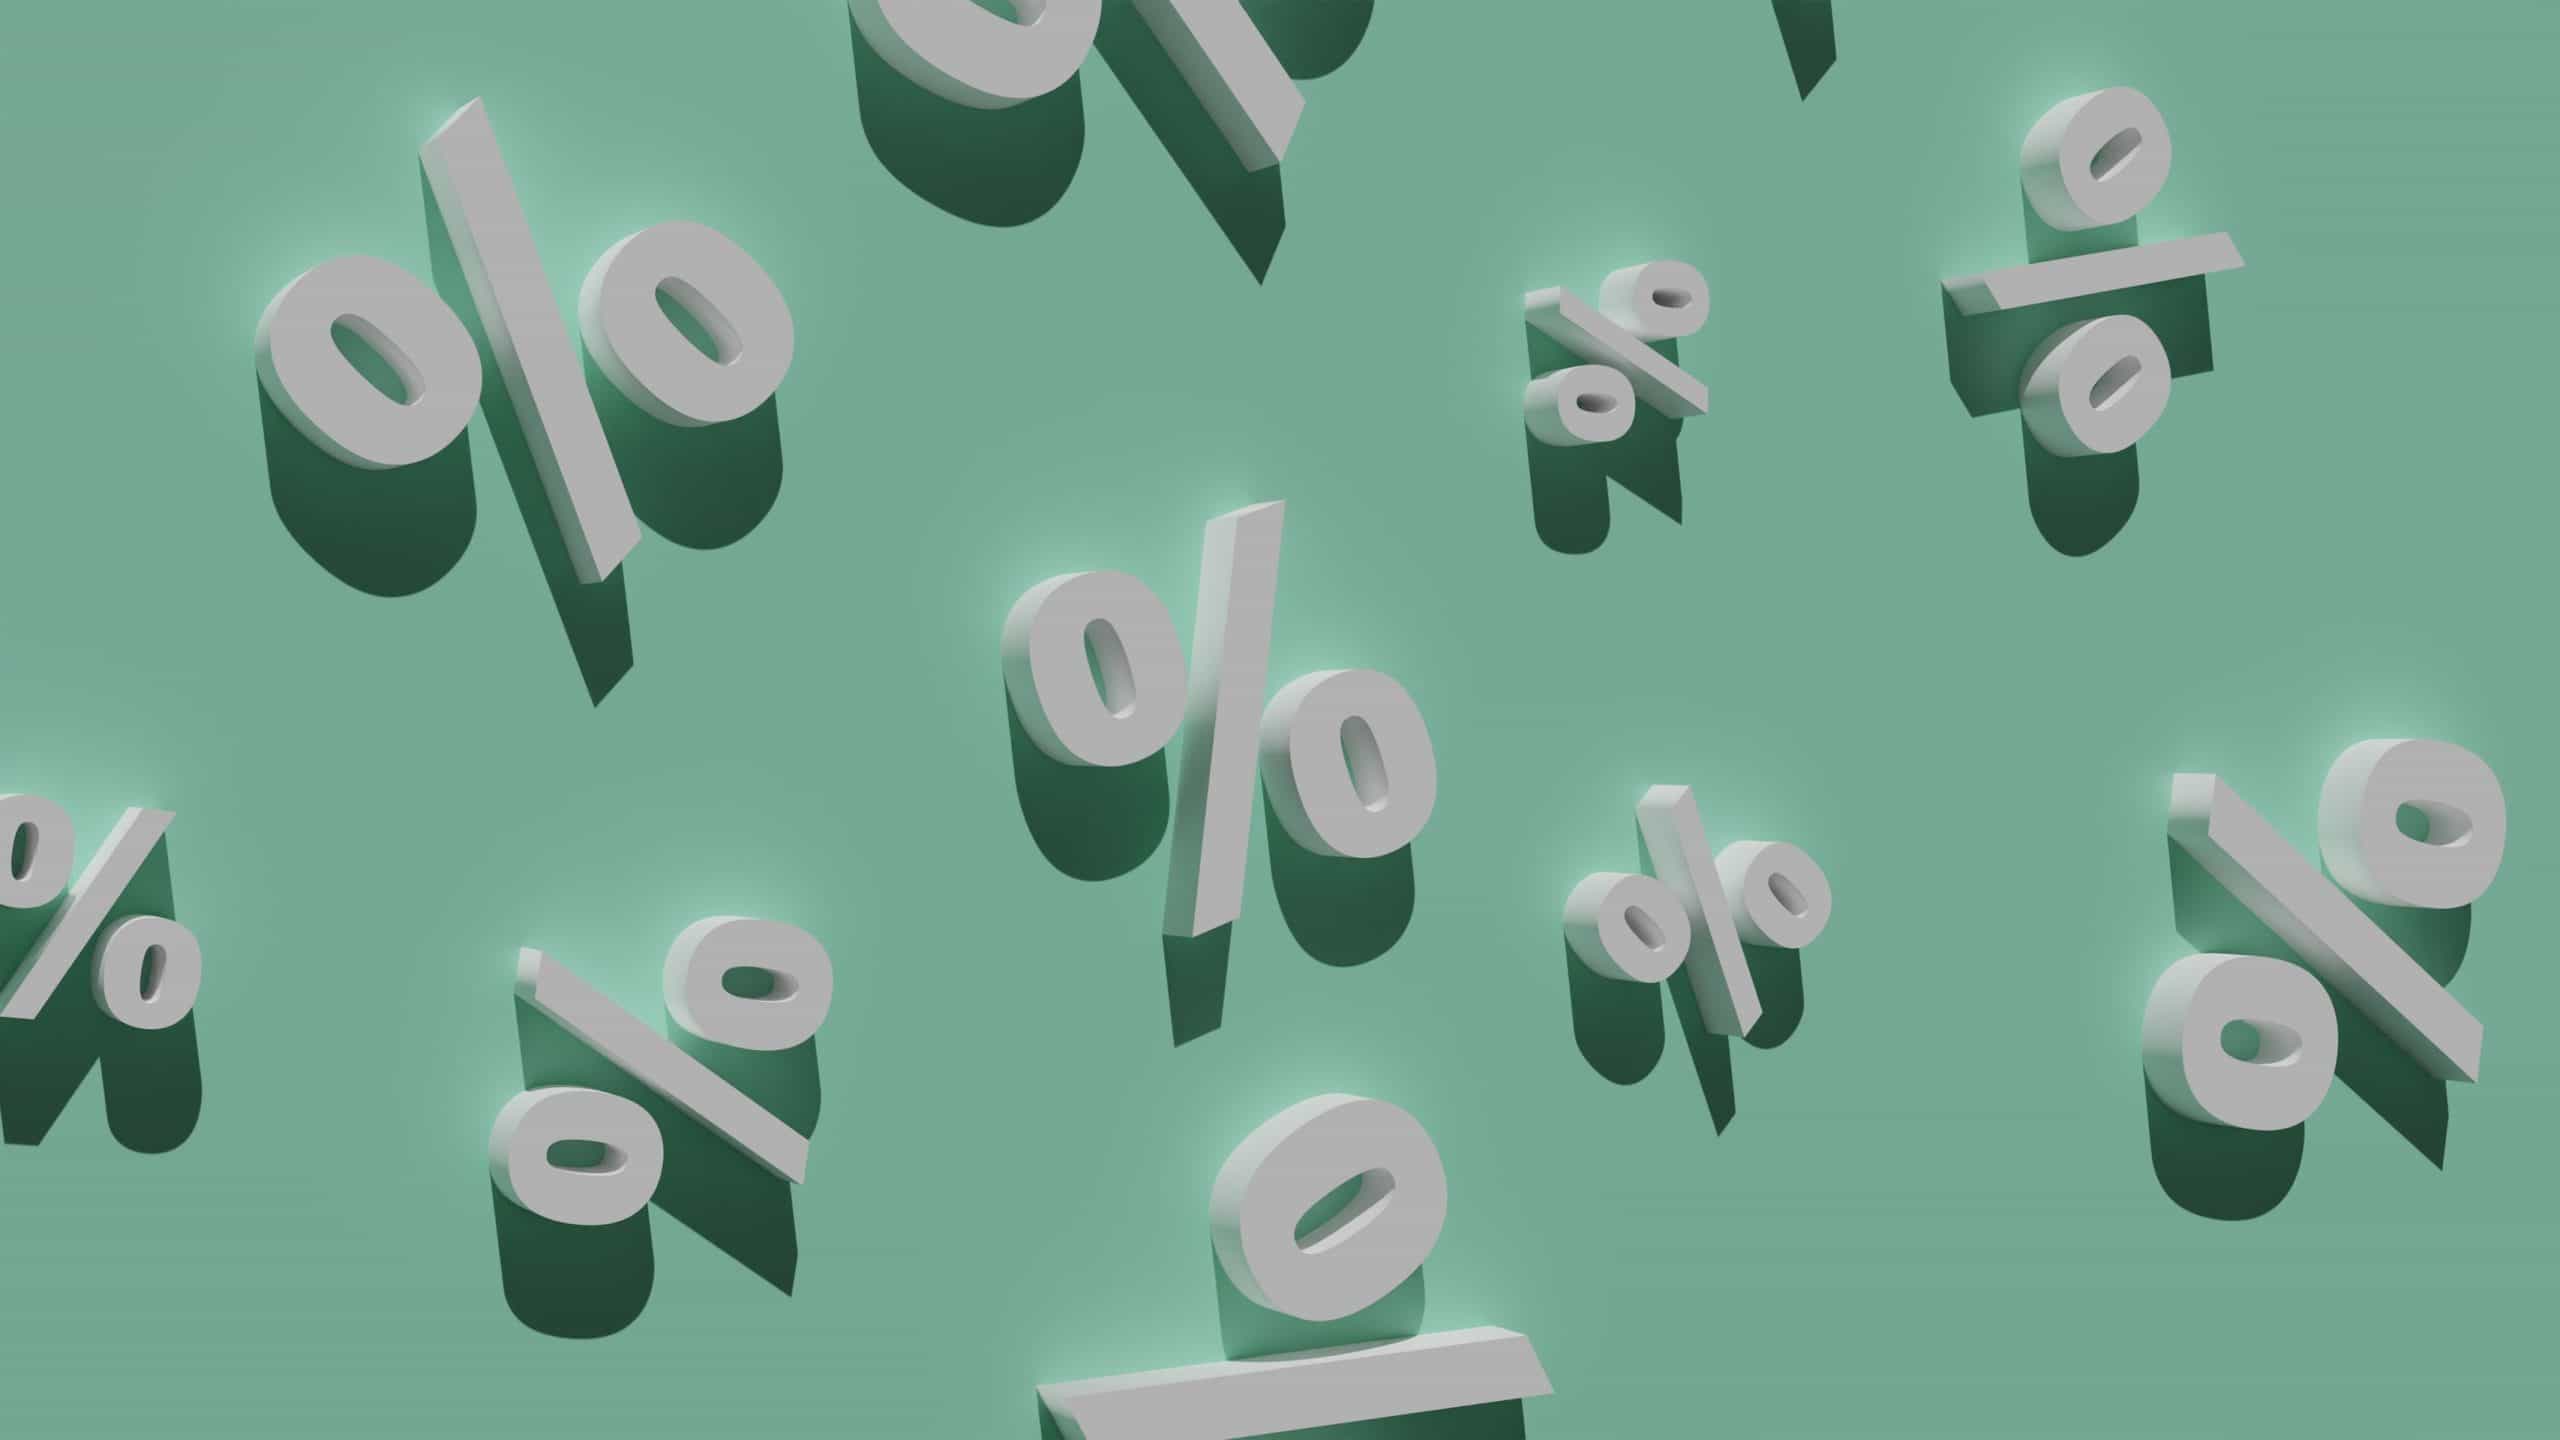 The percent (%) sign in 3D across a mint-green background.